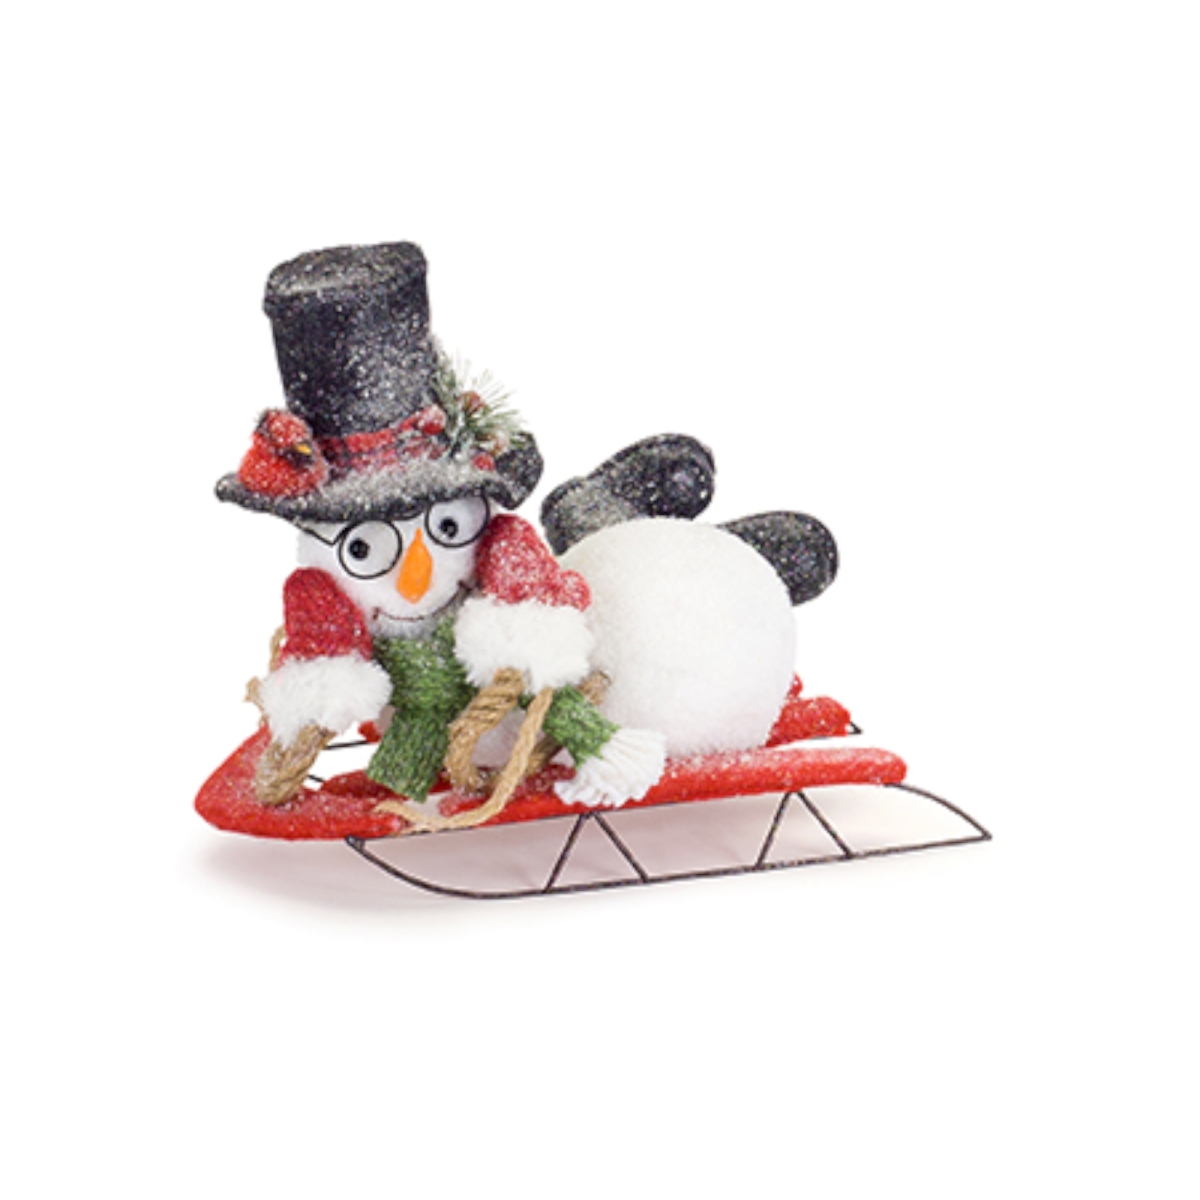 72399ds 10 X 6.25 In. Foam & Flocking Snowman On Sled Toy, White & Black - Set Of 2